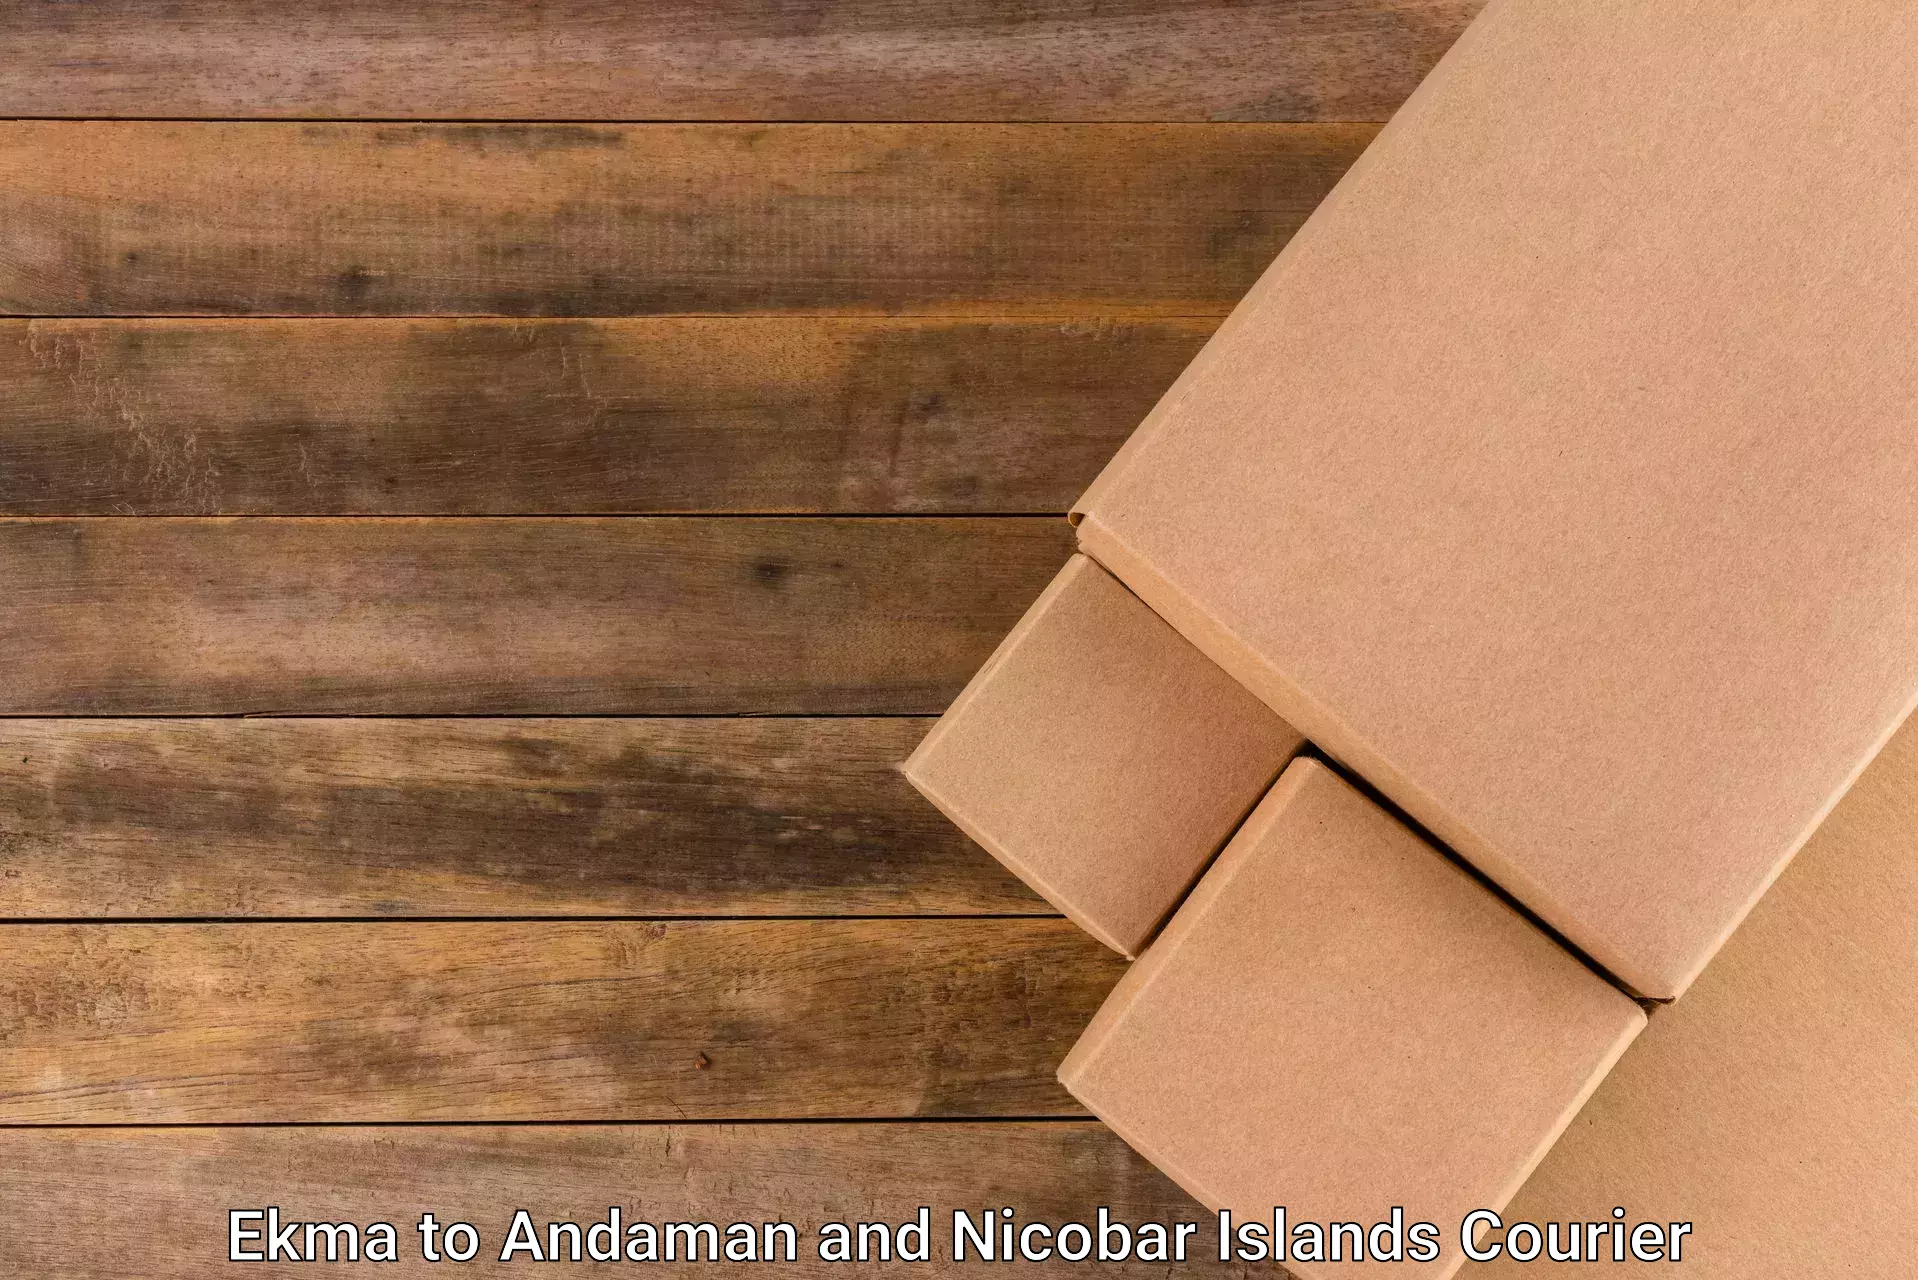 Secure packaging in Ekma to Andaman and Nicobar Islands